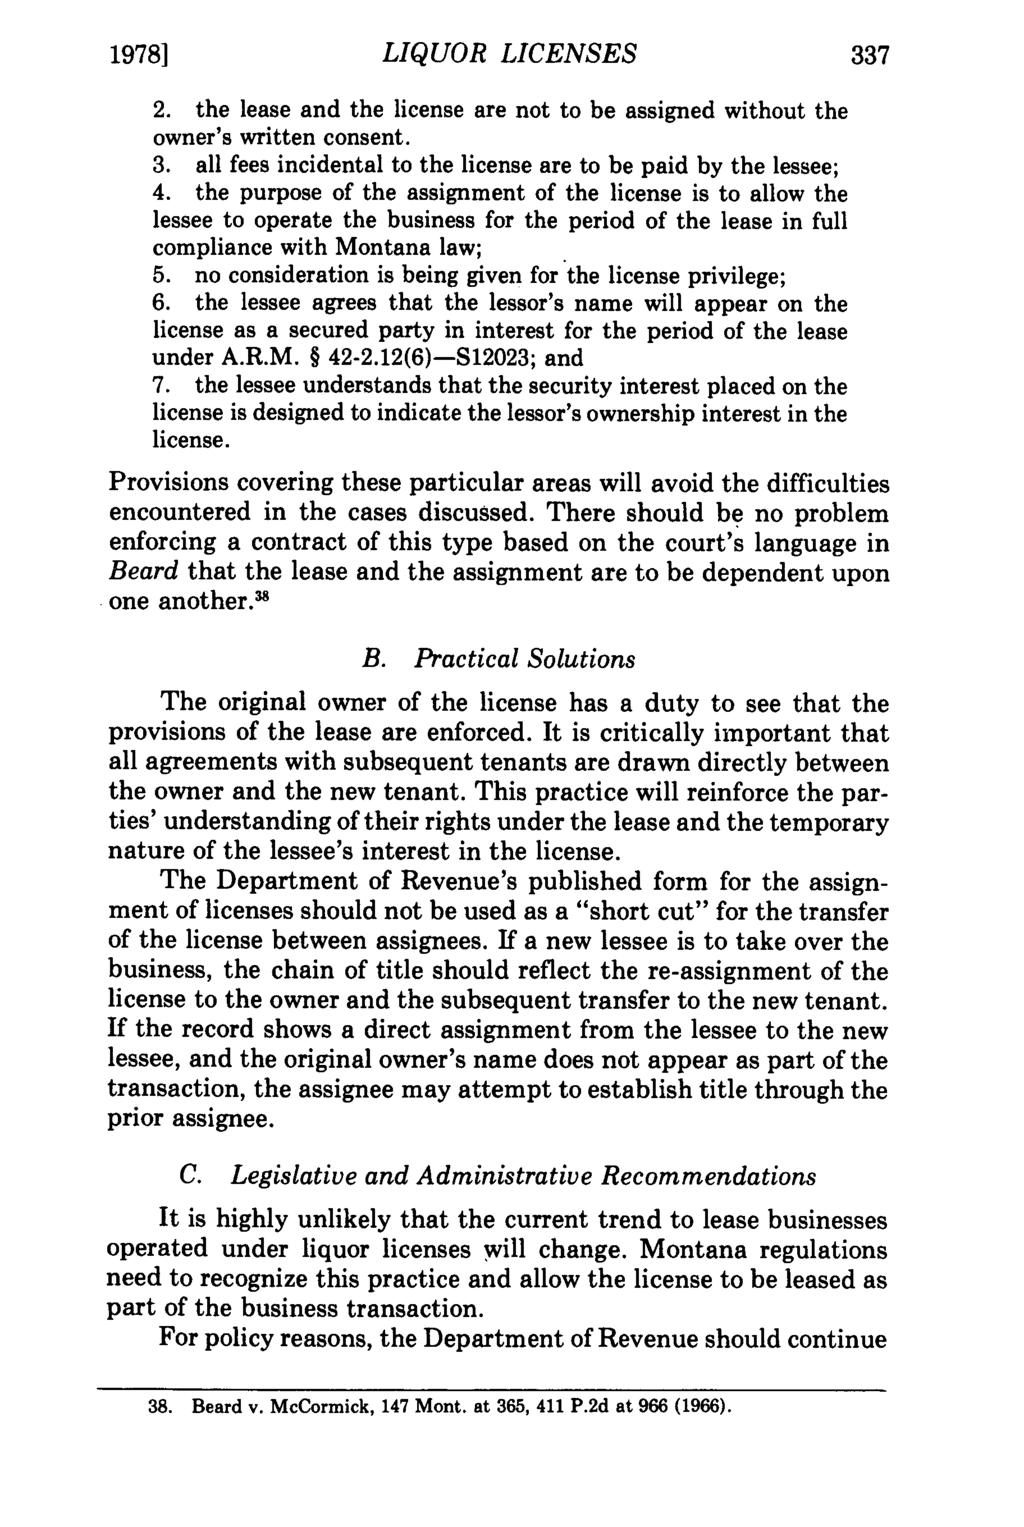 1978] Sumner: Montana LIQUOR Liquor Licenses: LICENSES Should They Be Leaseable? 2. the lease and the license are not to be assigned without the owner's written consent. 3.